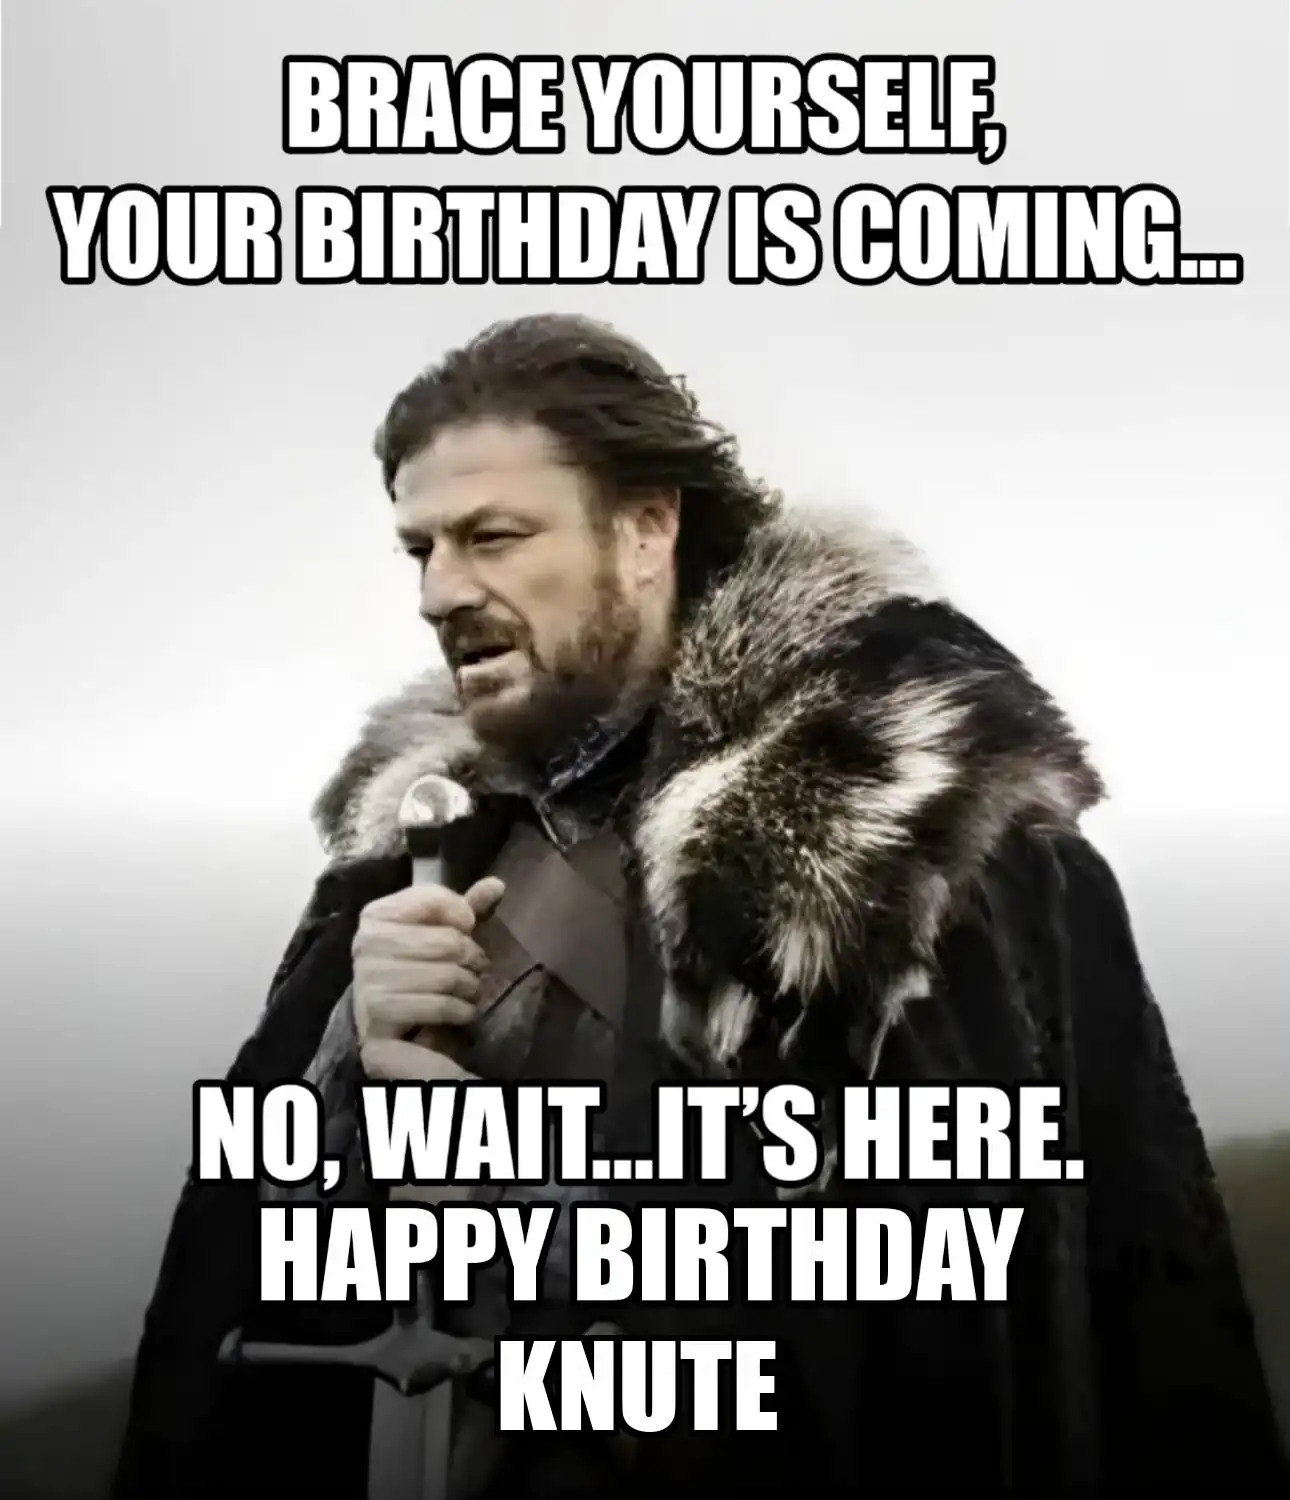 Happy Birthday Knute Brace Yourself Your Birthday Is Coming Meme